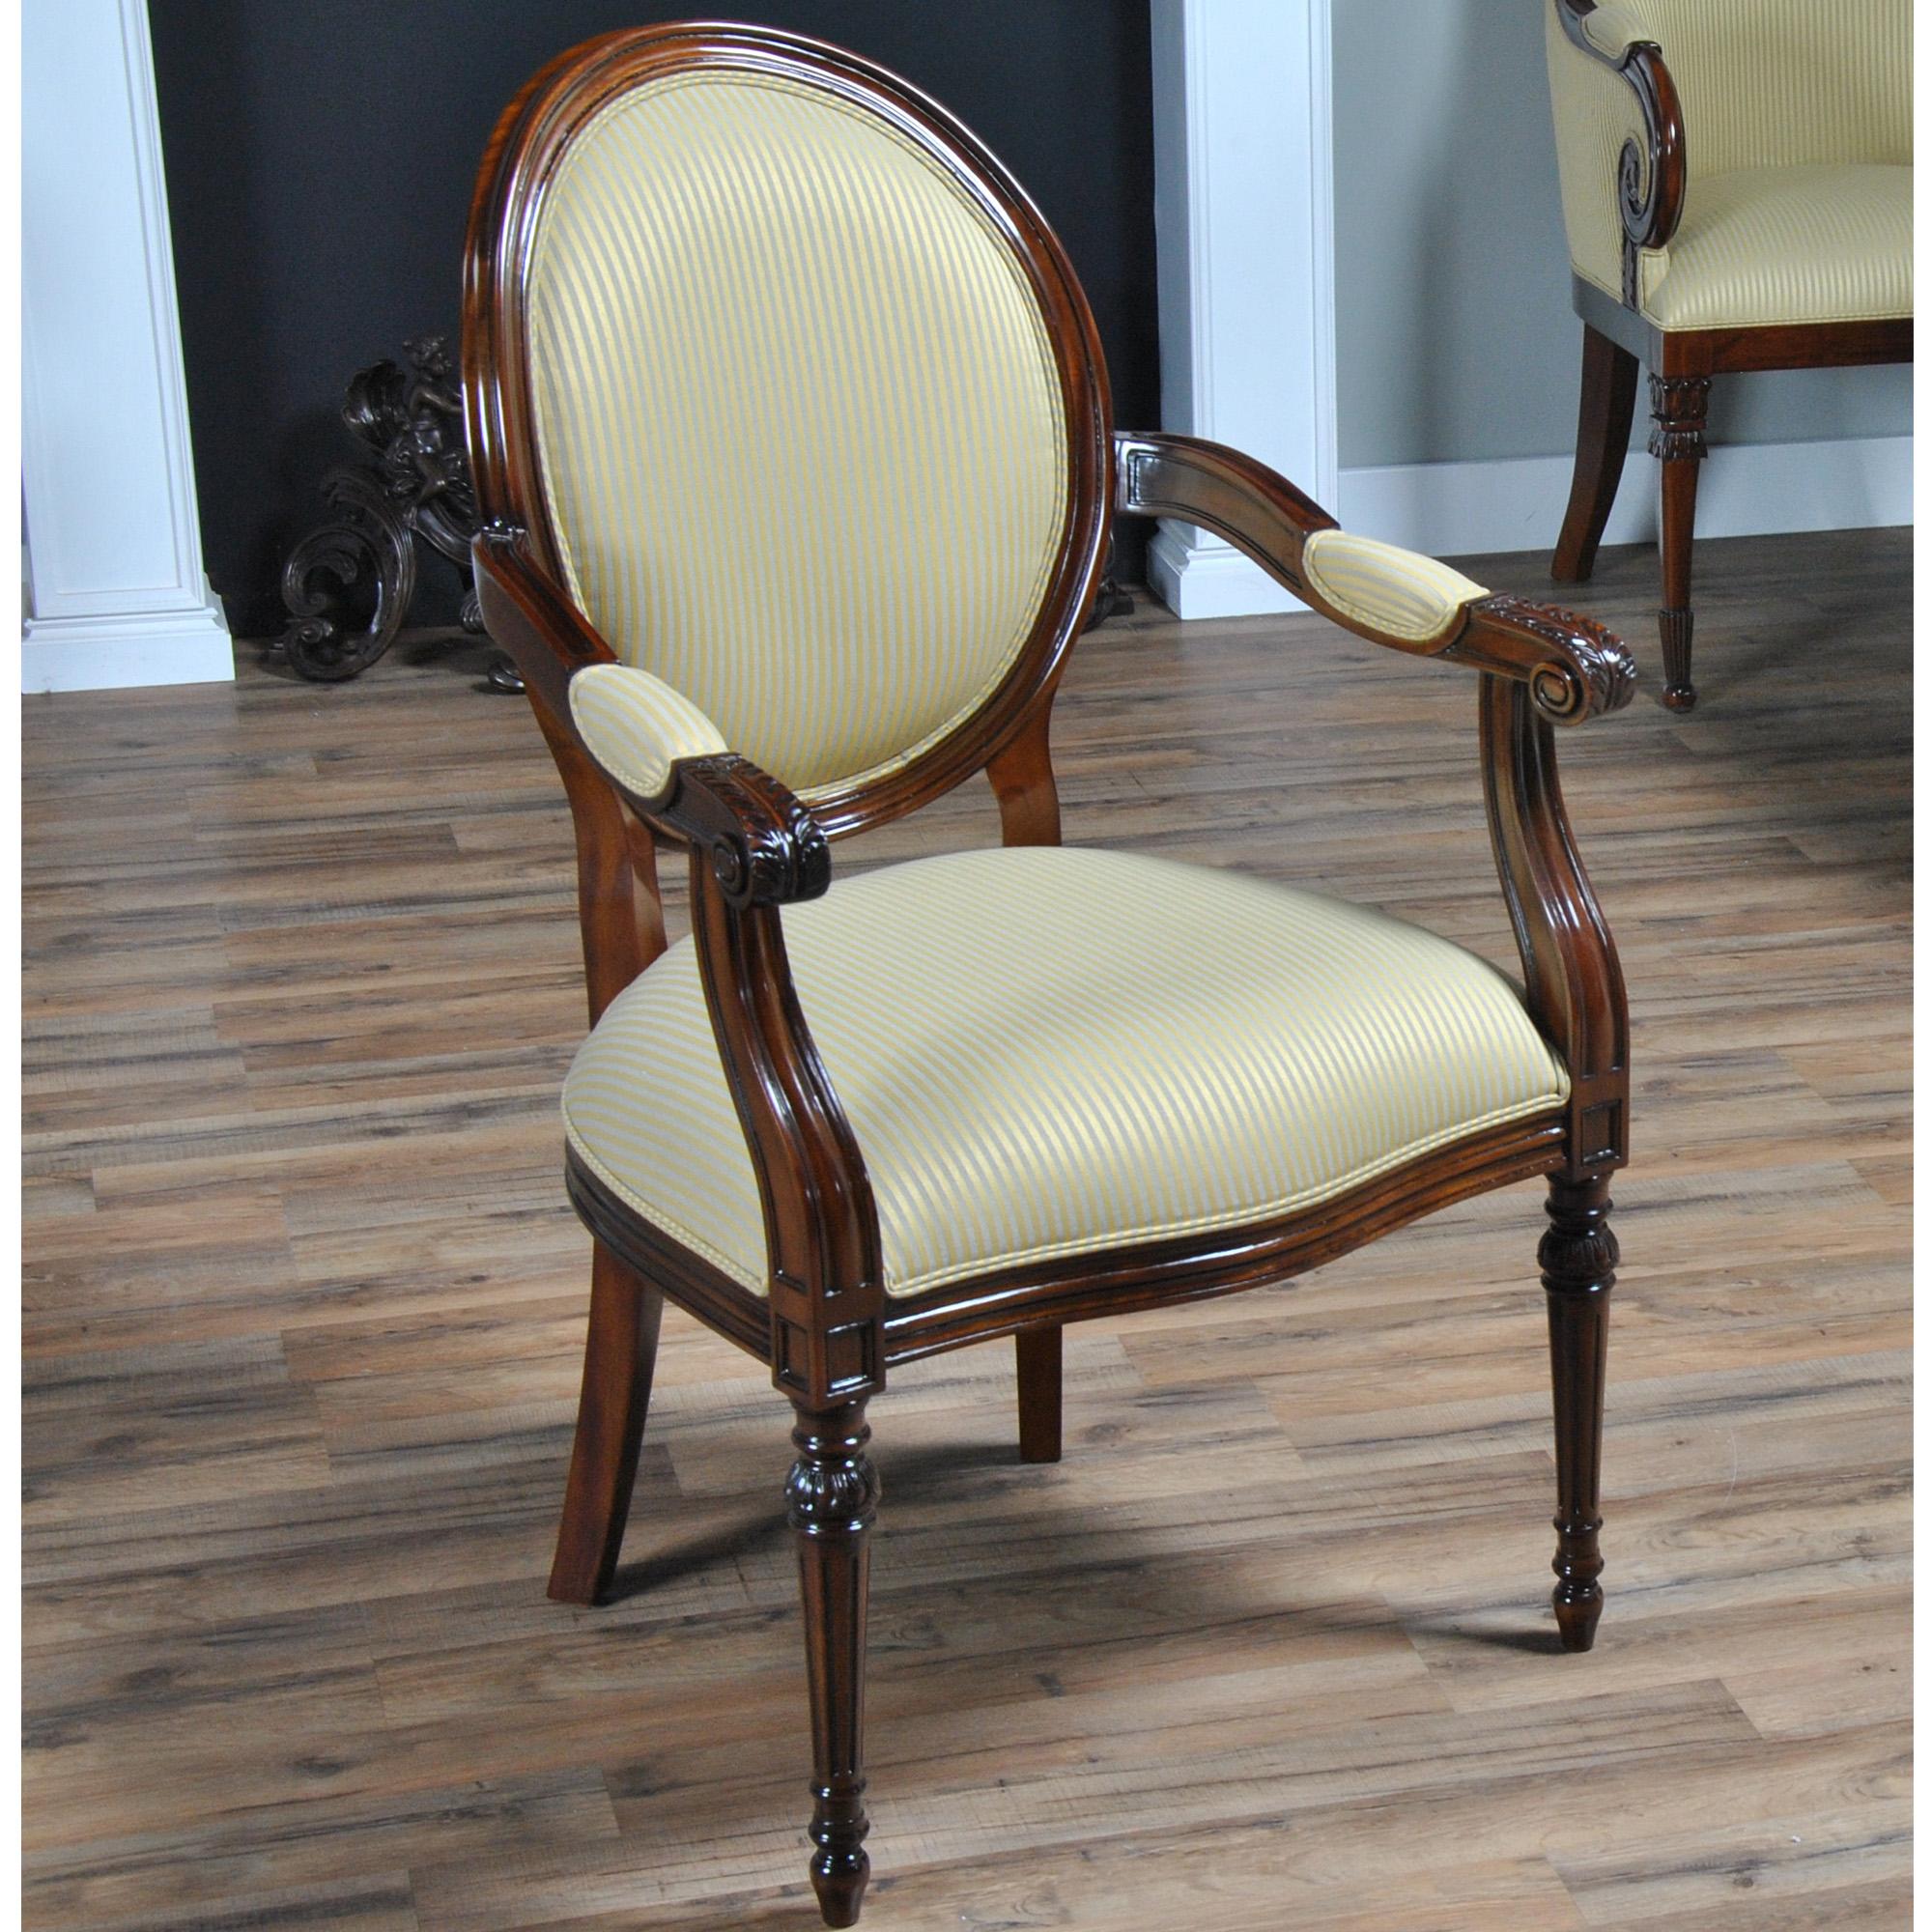 A set of ten Round Back Mahogany Chairs with 2 arm chairs and 8 side chairs. These high quality dining chairs are hand made from kiln dried solid mahogany. Neutrally upholstered in our most popular fabric these chairs are restrained in their design